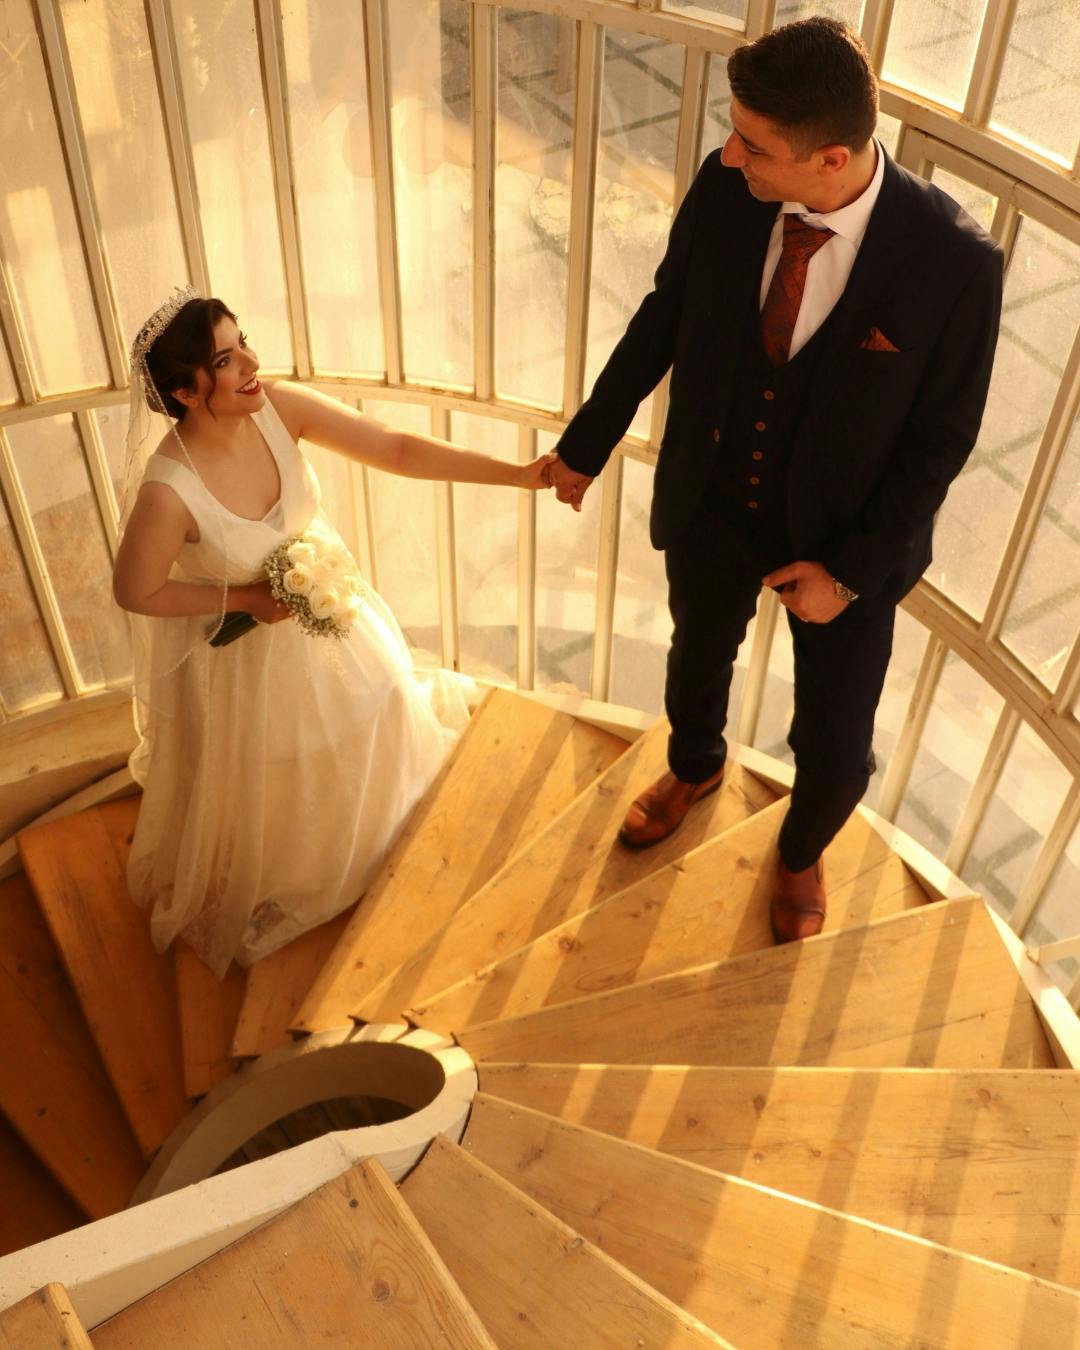 Woman walking with groom up curved leading line staircase.